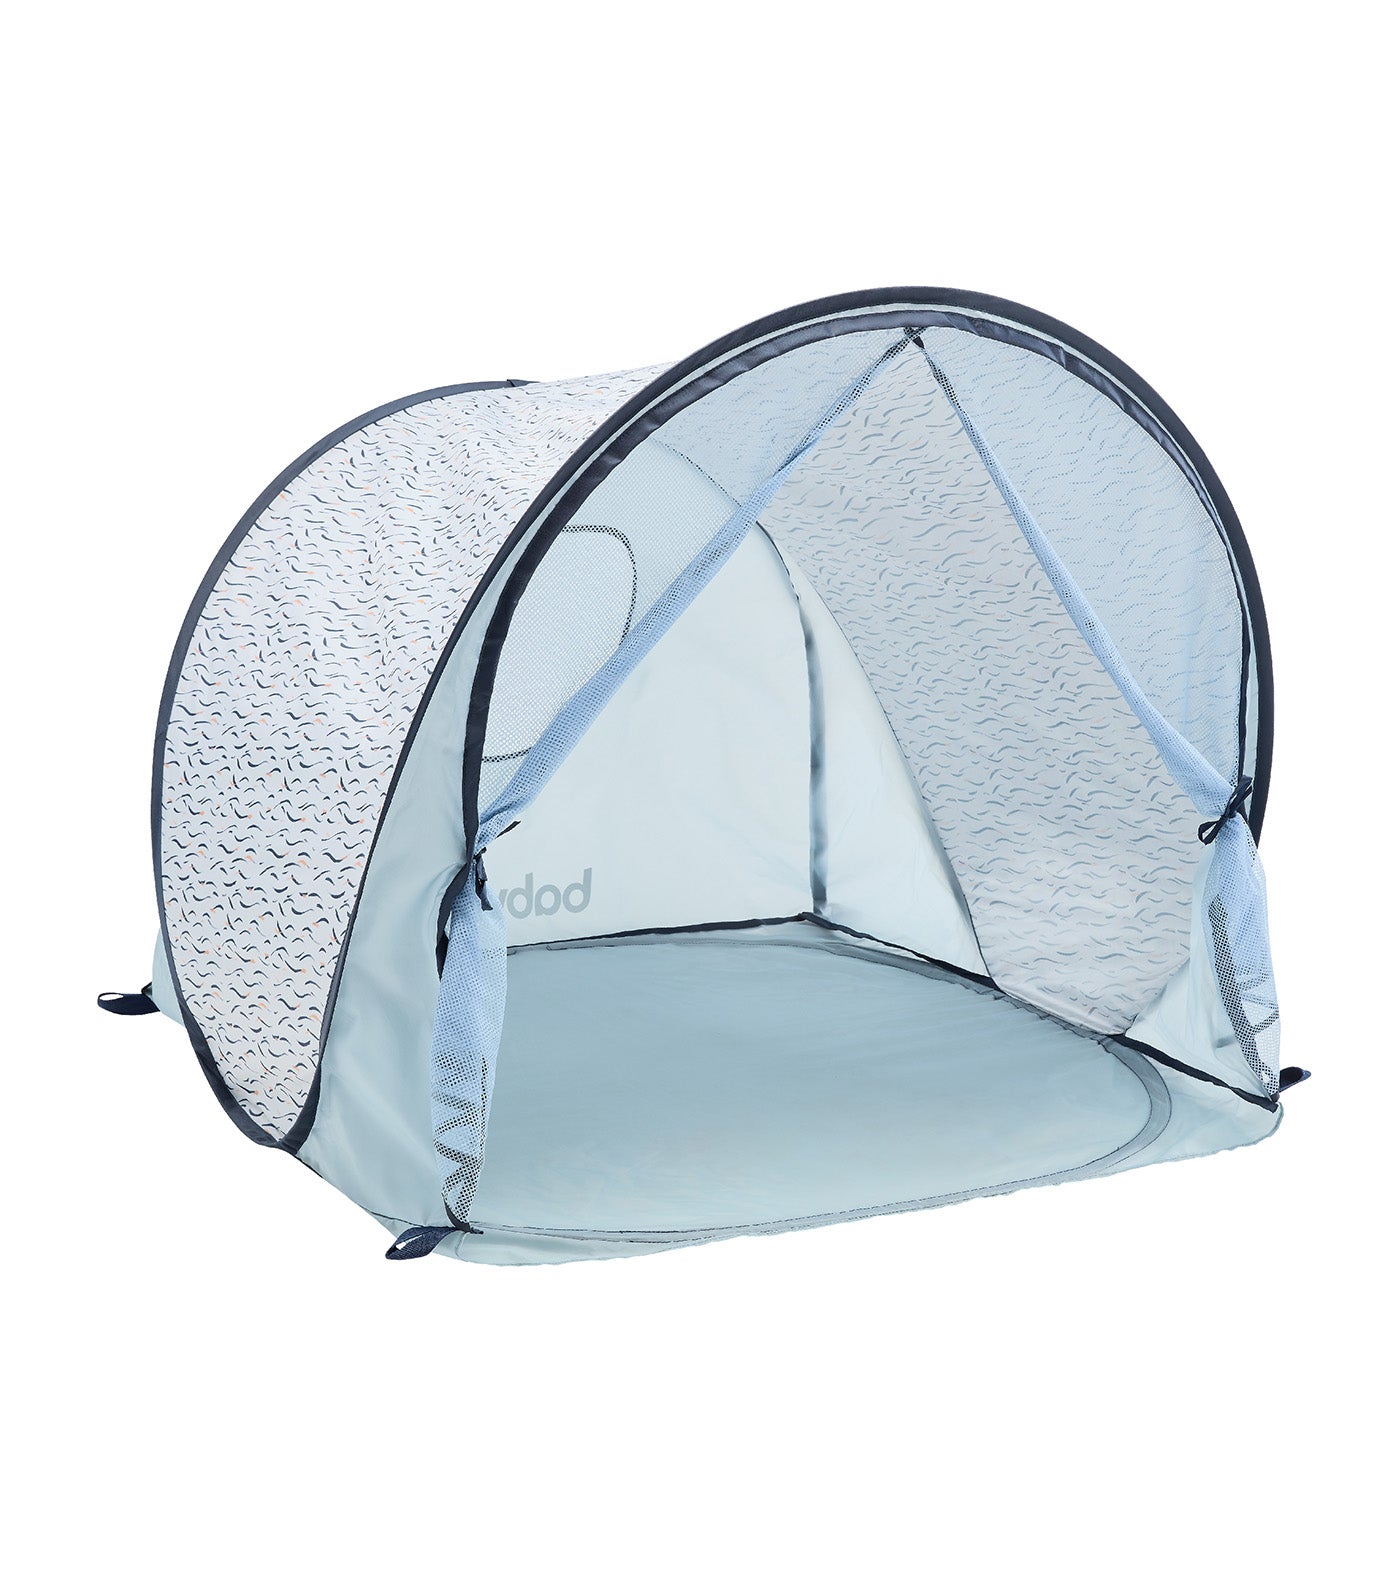 High Protection Anti-UV SPF 50+ Tent for Baby - Blue Waves